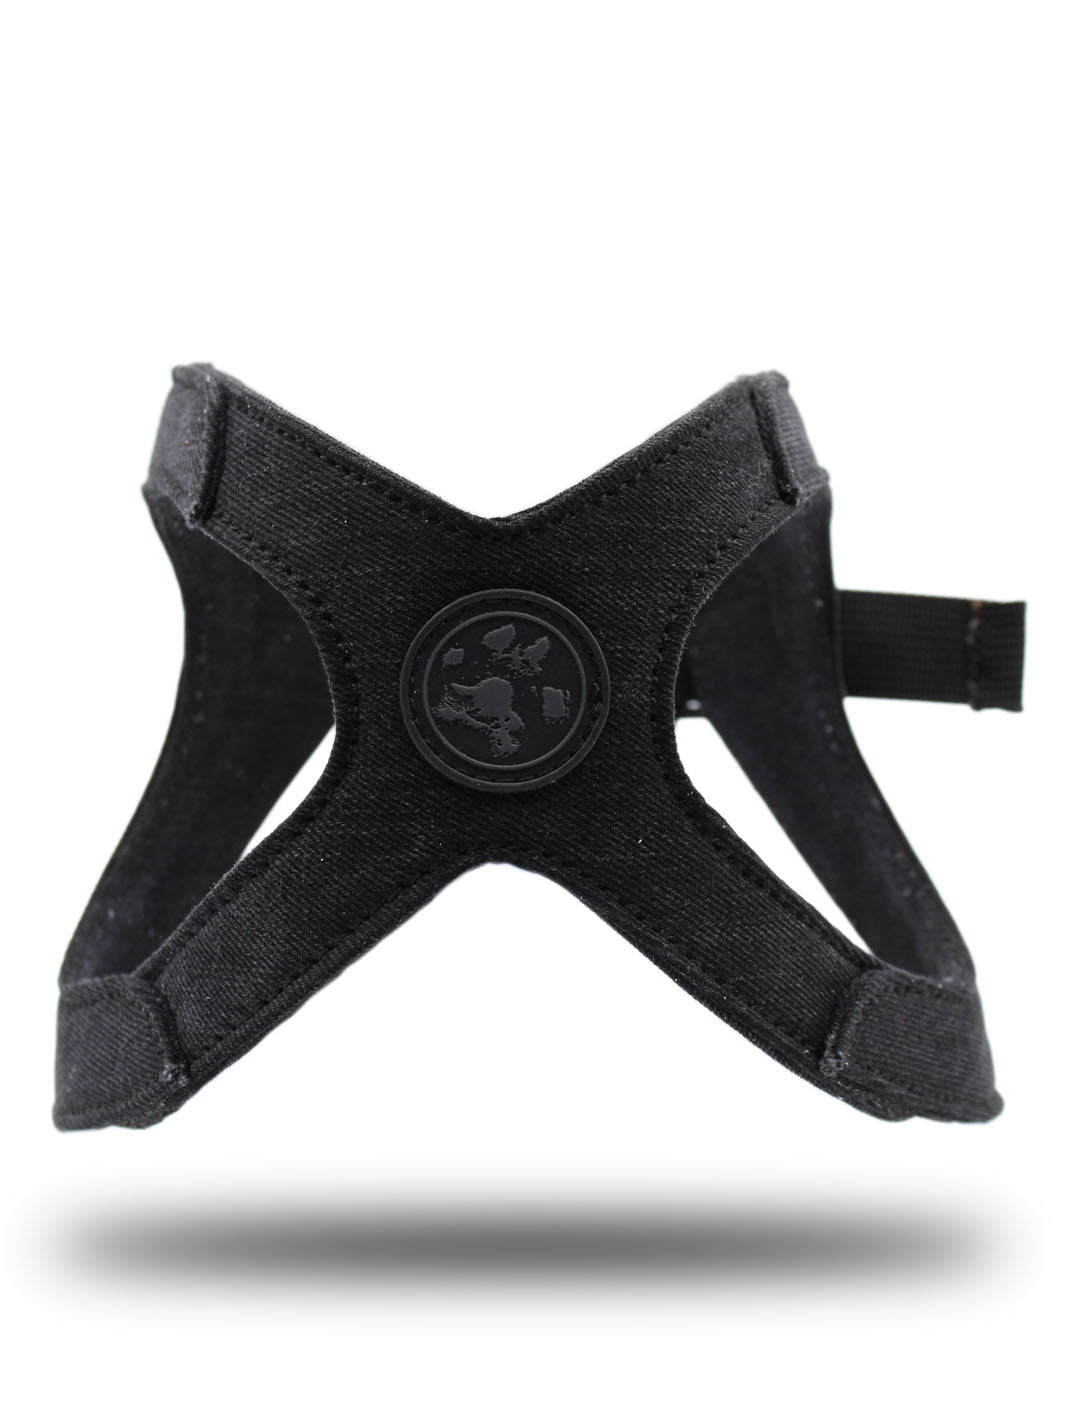 The MAGNUS Canis signature frenchie harness in black repurposed denim as viewed from the front.